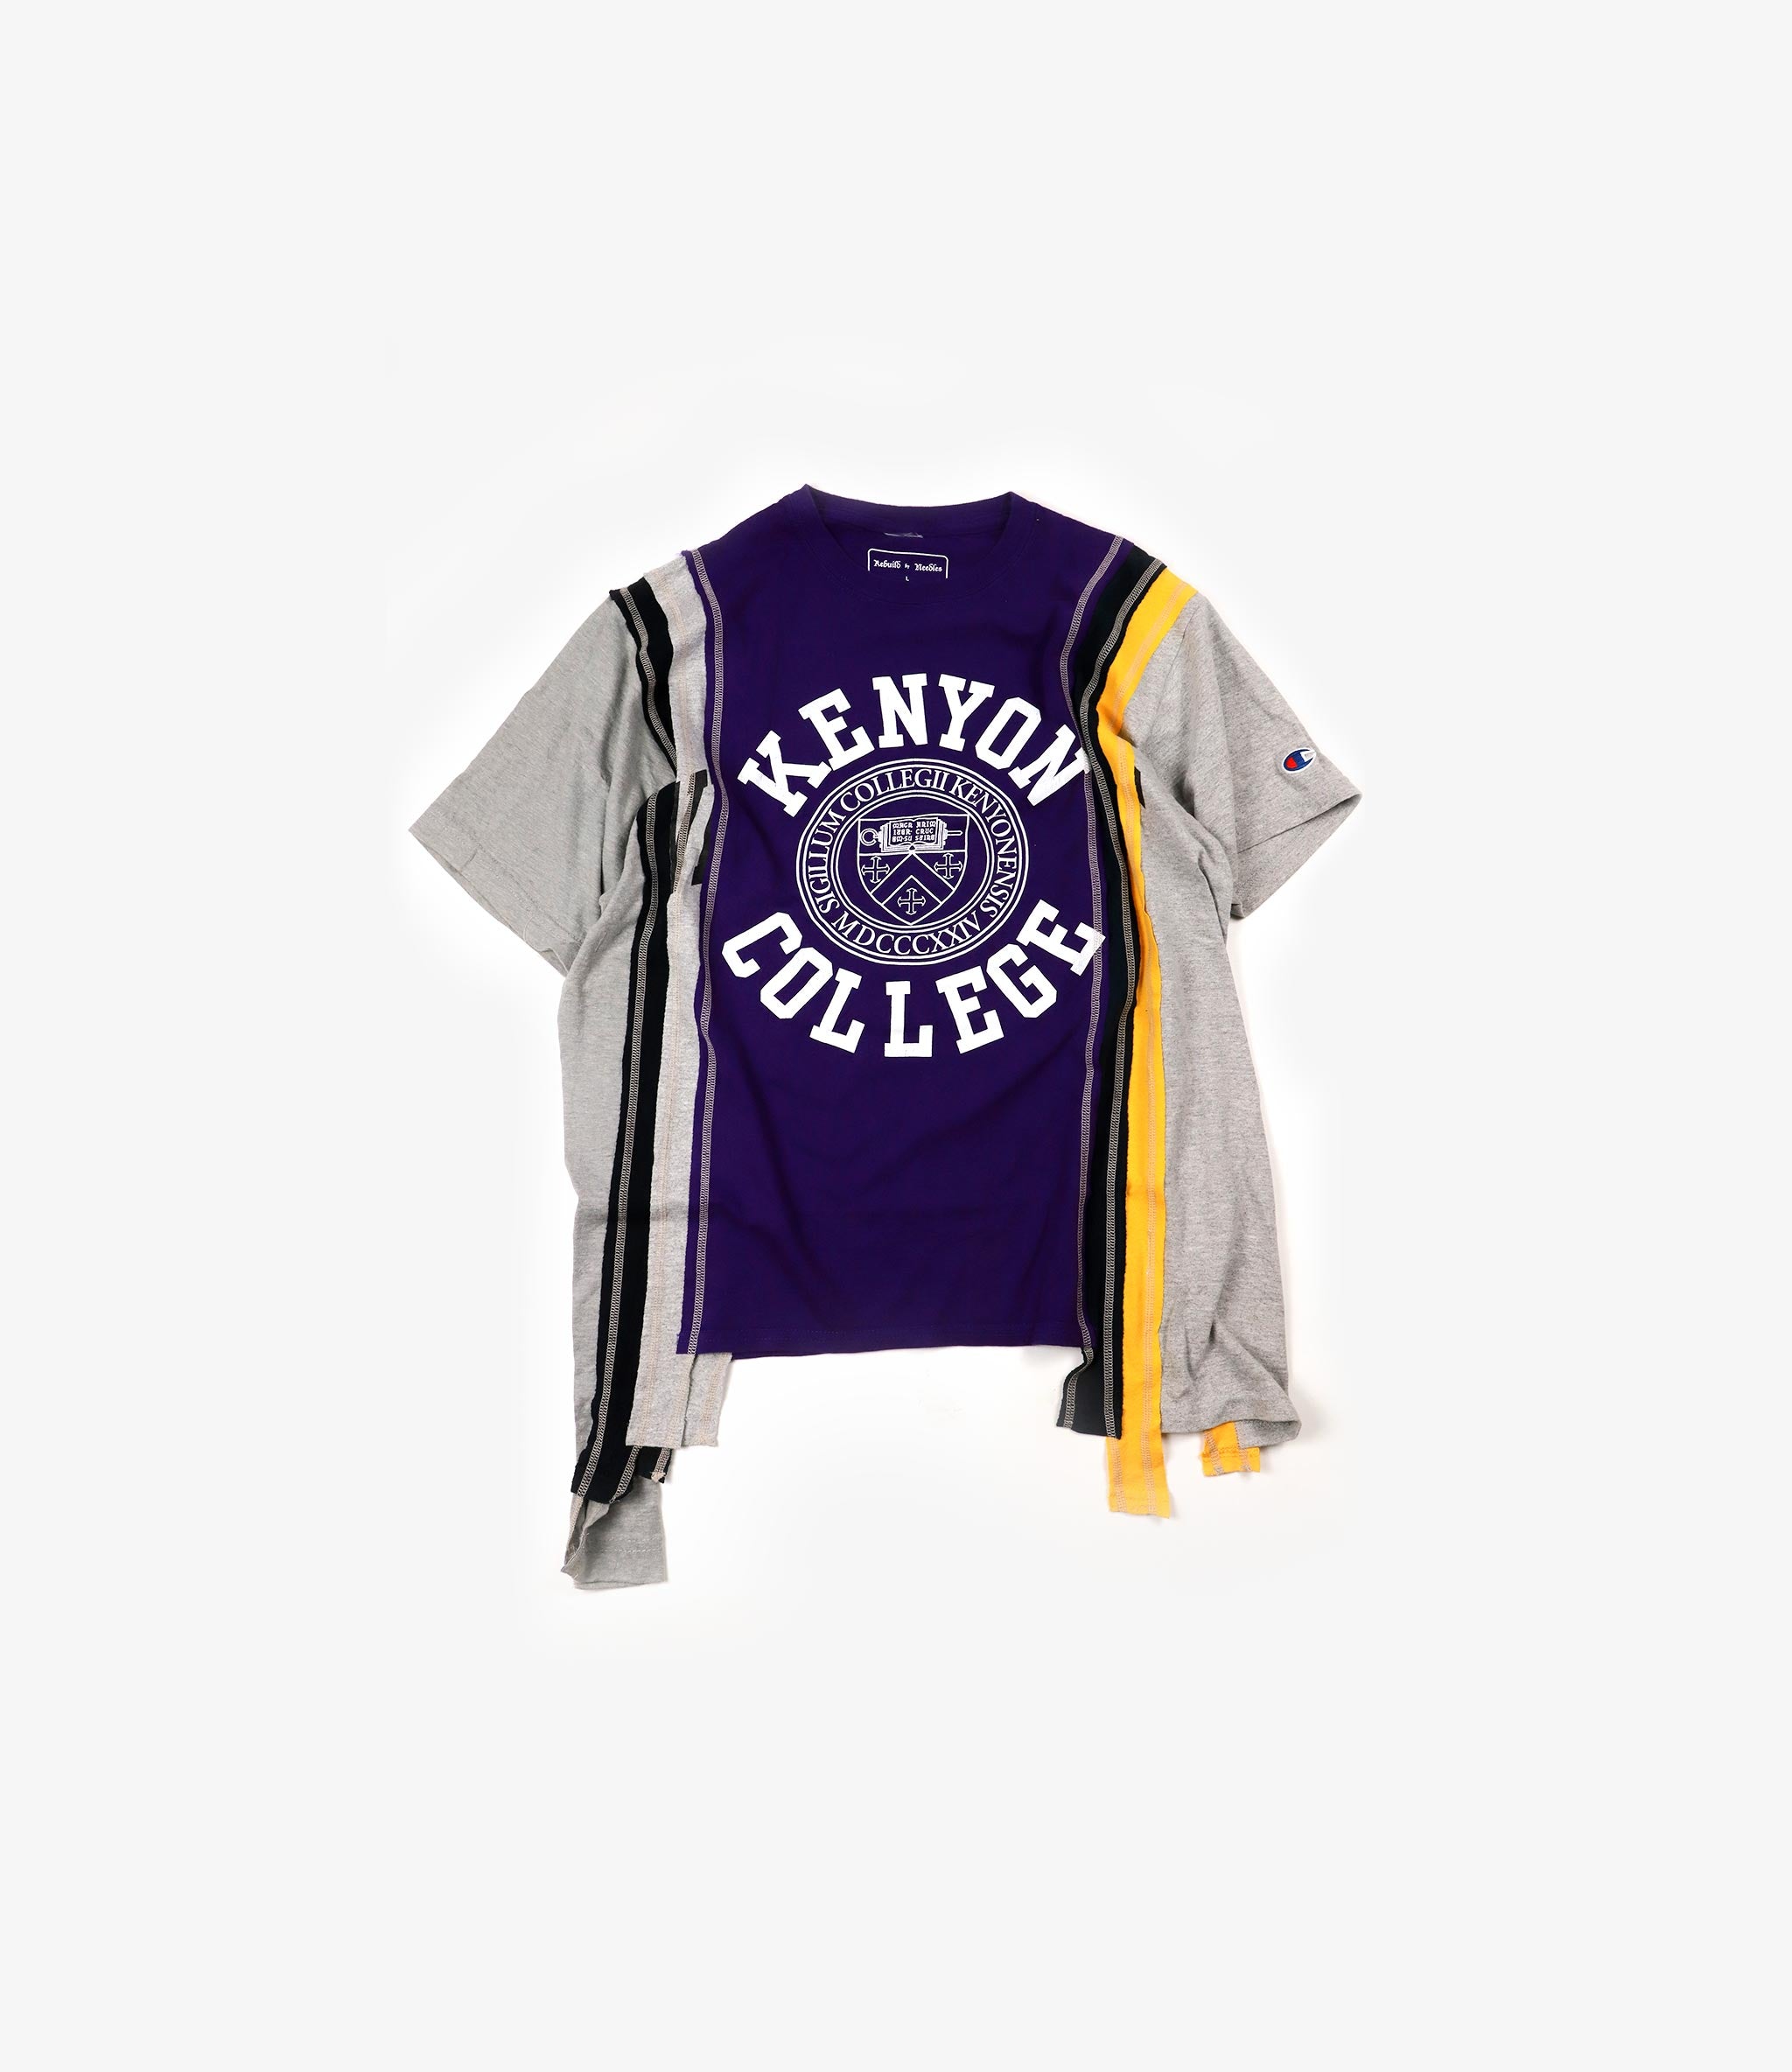 Rebuild by Needles 7 Cuts Short Sleeve College Tee - L